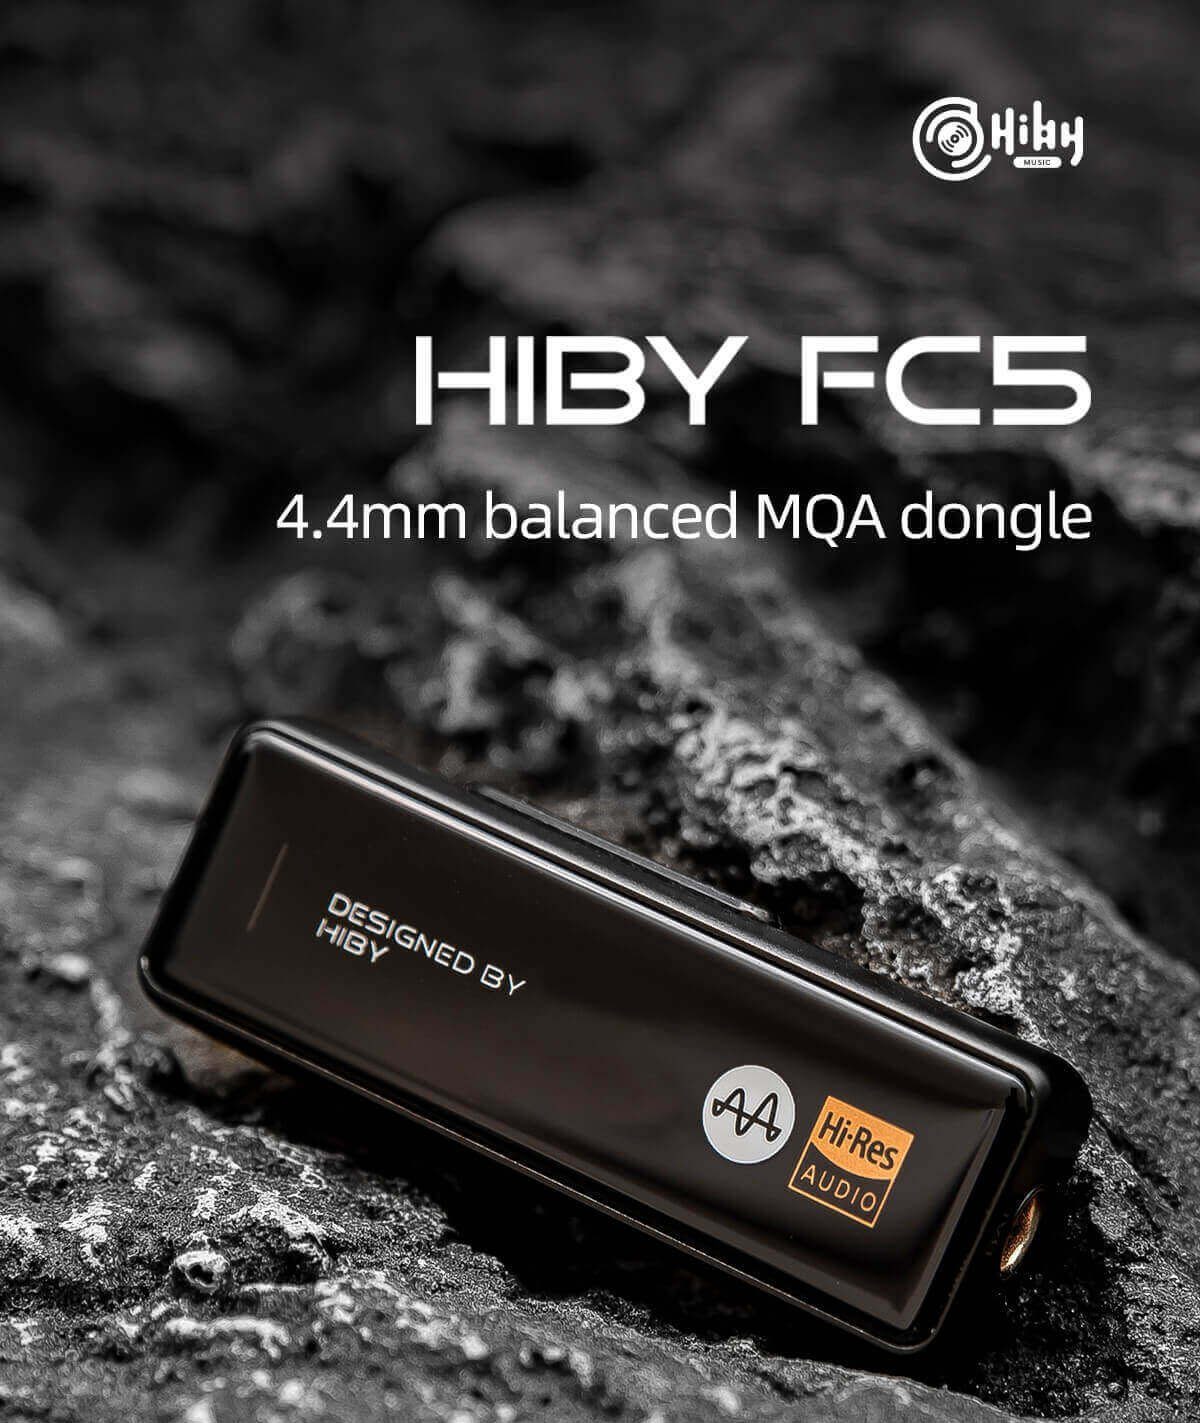 HiBy FC5 Latest USB DAC/AMP With 4.4mm Balanced Connection & MQA Support